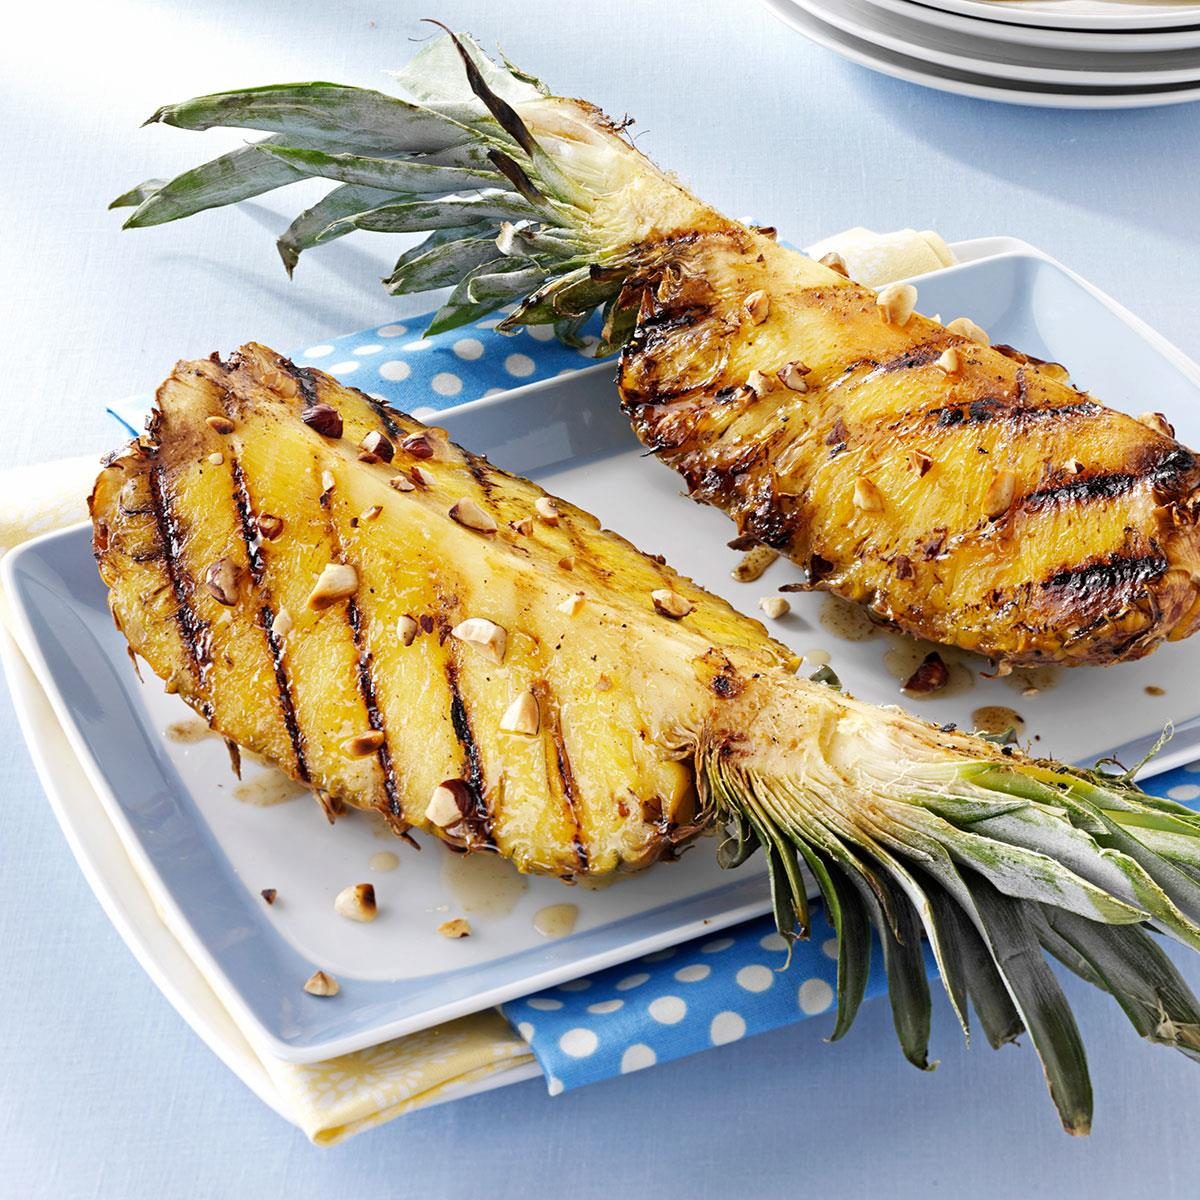 Grilled Pineapple Exps12151 Bos2469759a01 10 4bc Rms 1